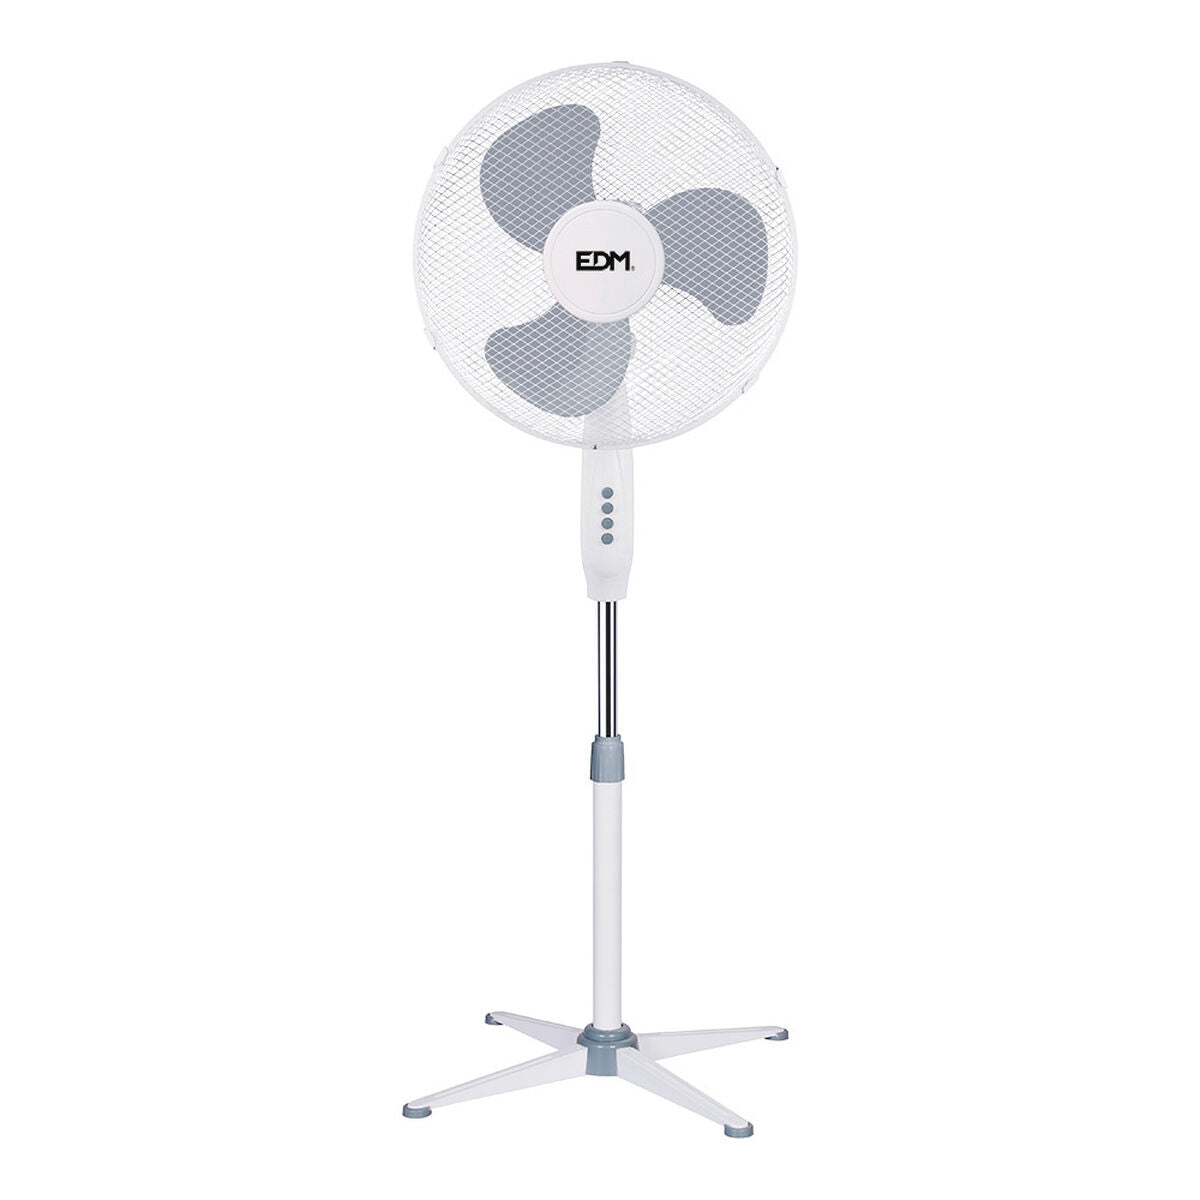 Freestanding Fan EDM White Grey 45 W, EDM, Home and cooking, Portable air conditioning, freestanding-fan-edm-white-grey-45-w, Brand_EDM, category-reference-2399, category-reference-2450, category-reference-2451, category-reference-t-19656, category-reference-t-21087, category-reference-t-25217, Condition_NEW, ferretería, Price_20 - 50, summer, RiotNook